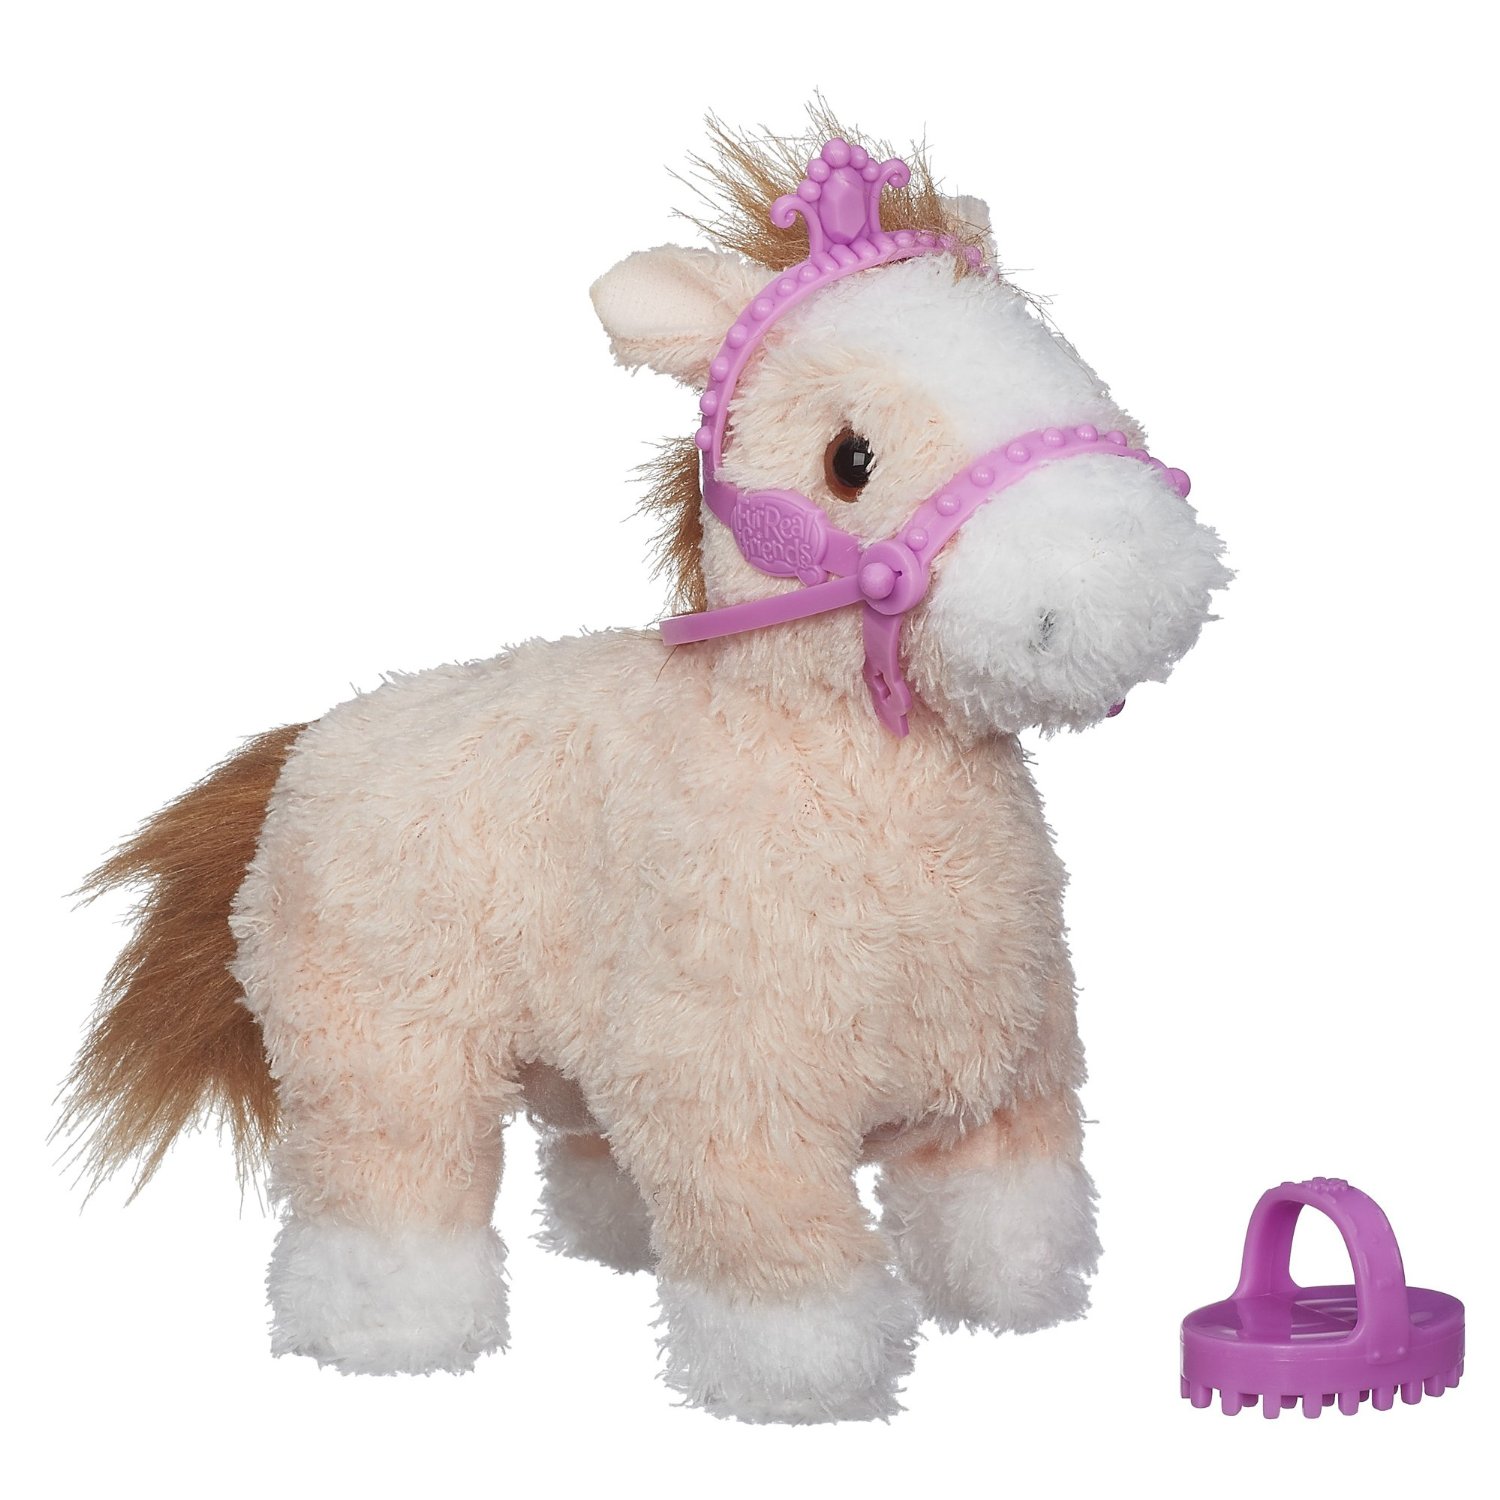 FurReal Friends Strawberry Rose Pet Only $10.75 – 40% Savings